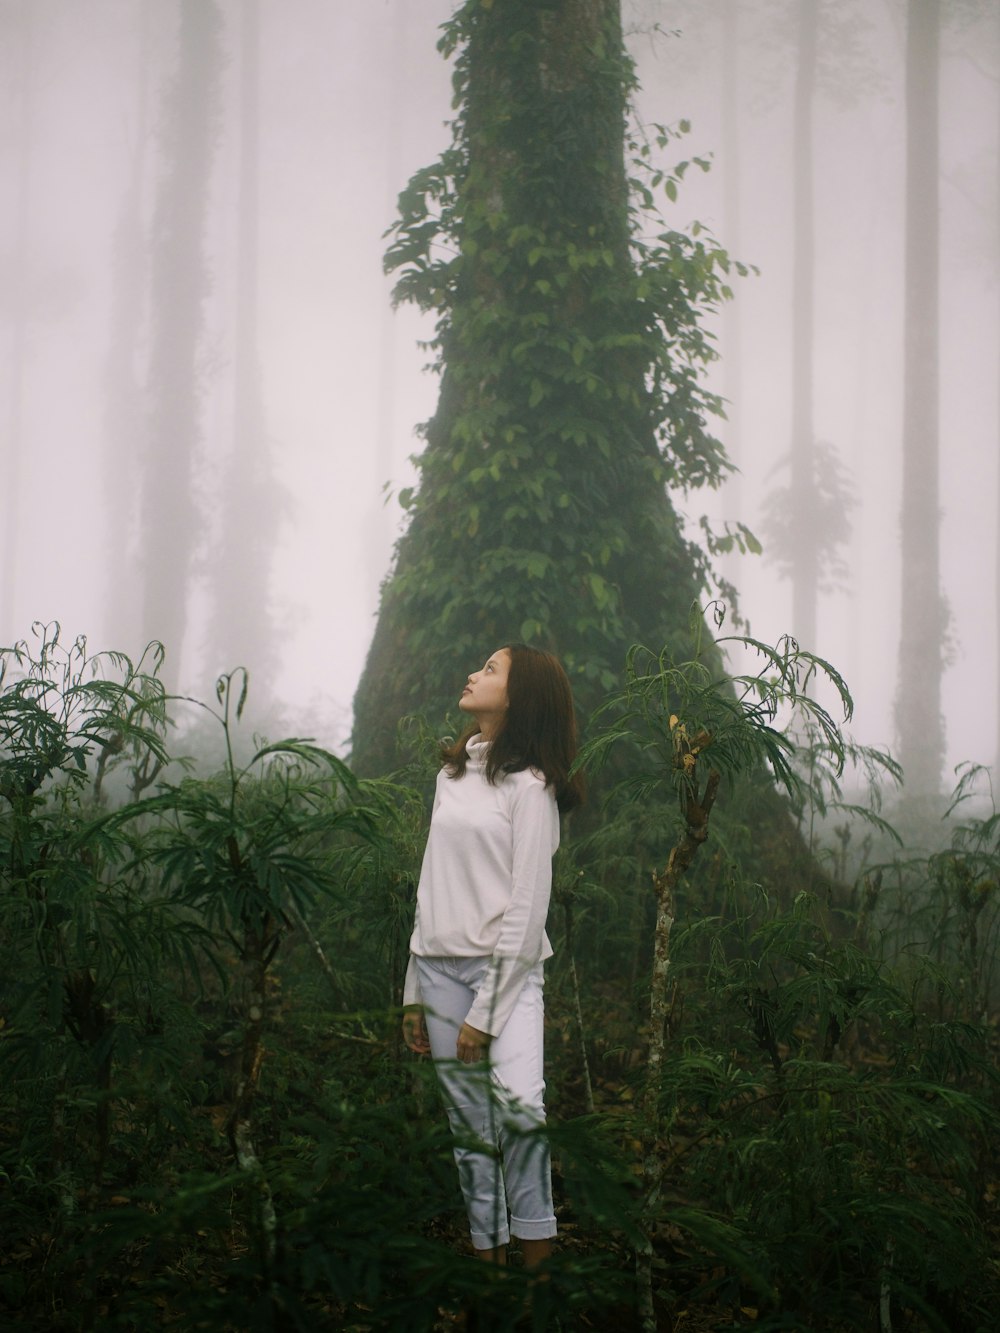 woman in white long sleeve shirt standing beside green tree during daytime